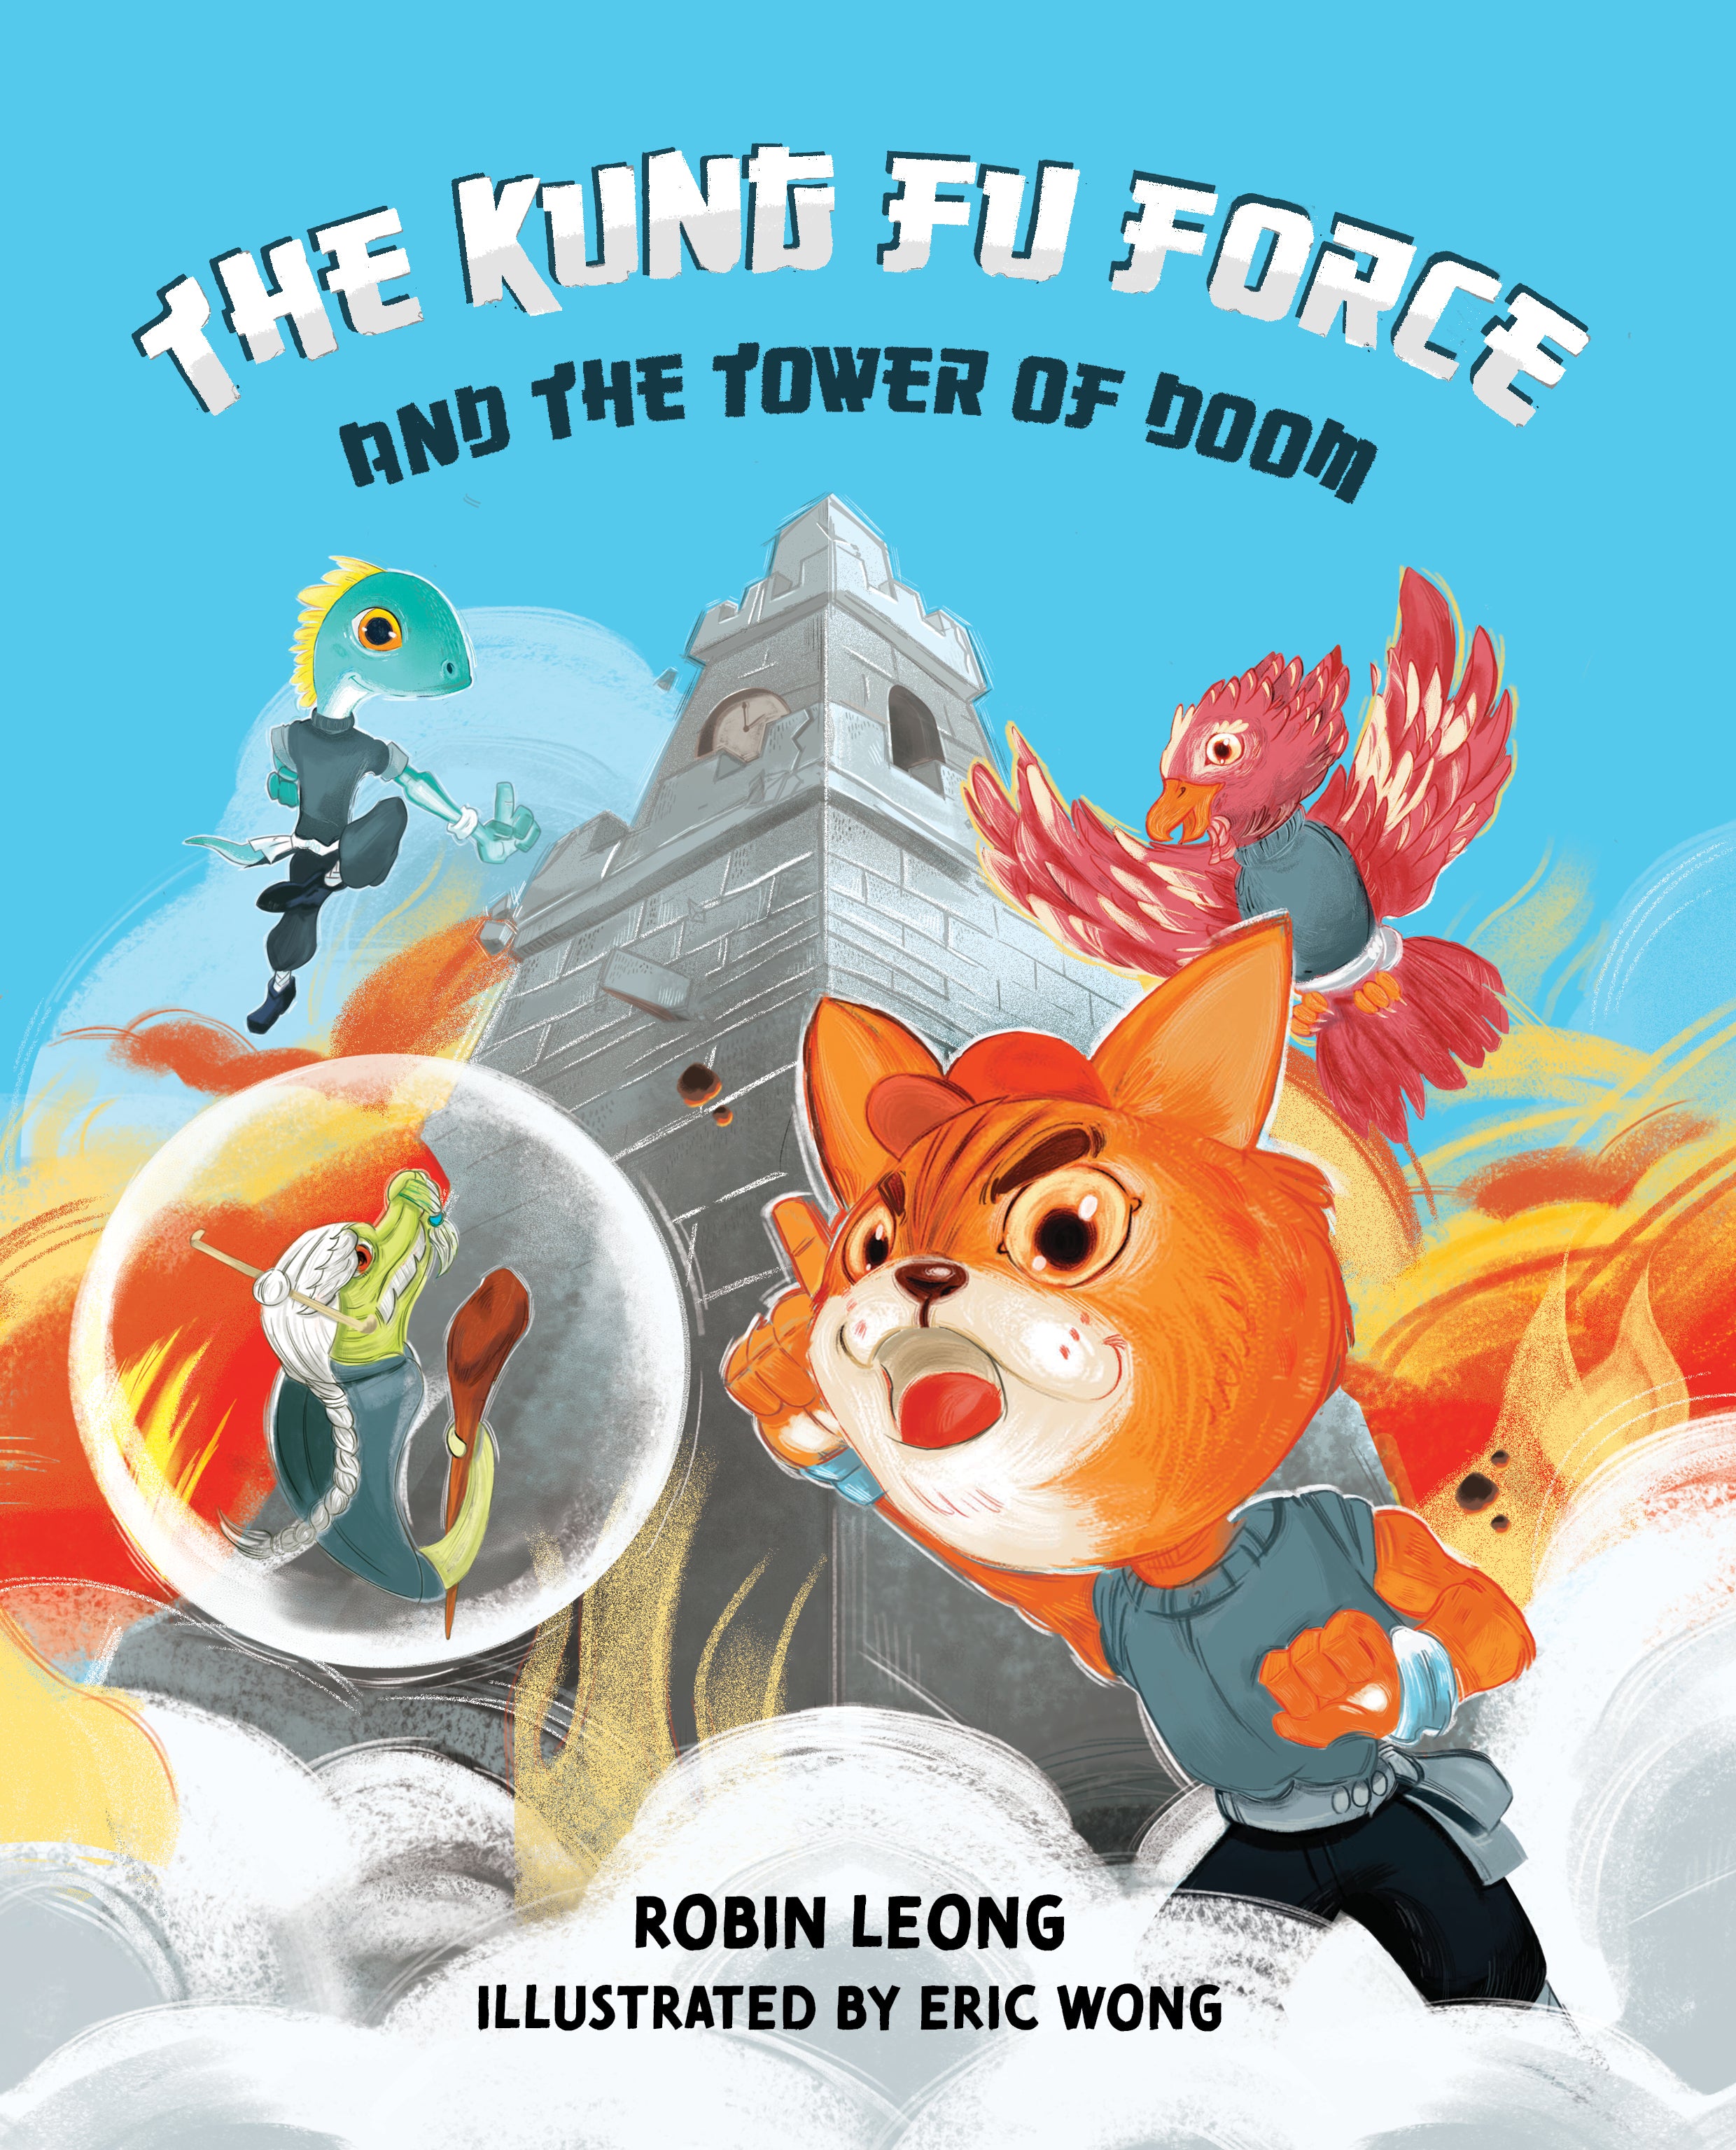 The Kung Fu Force and the Tower of Doom (Book 1)